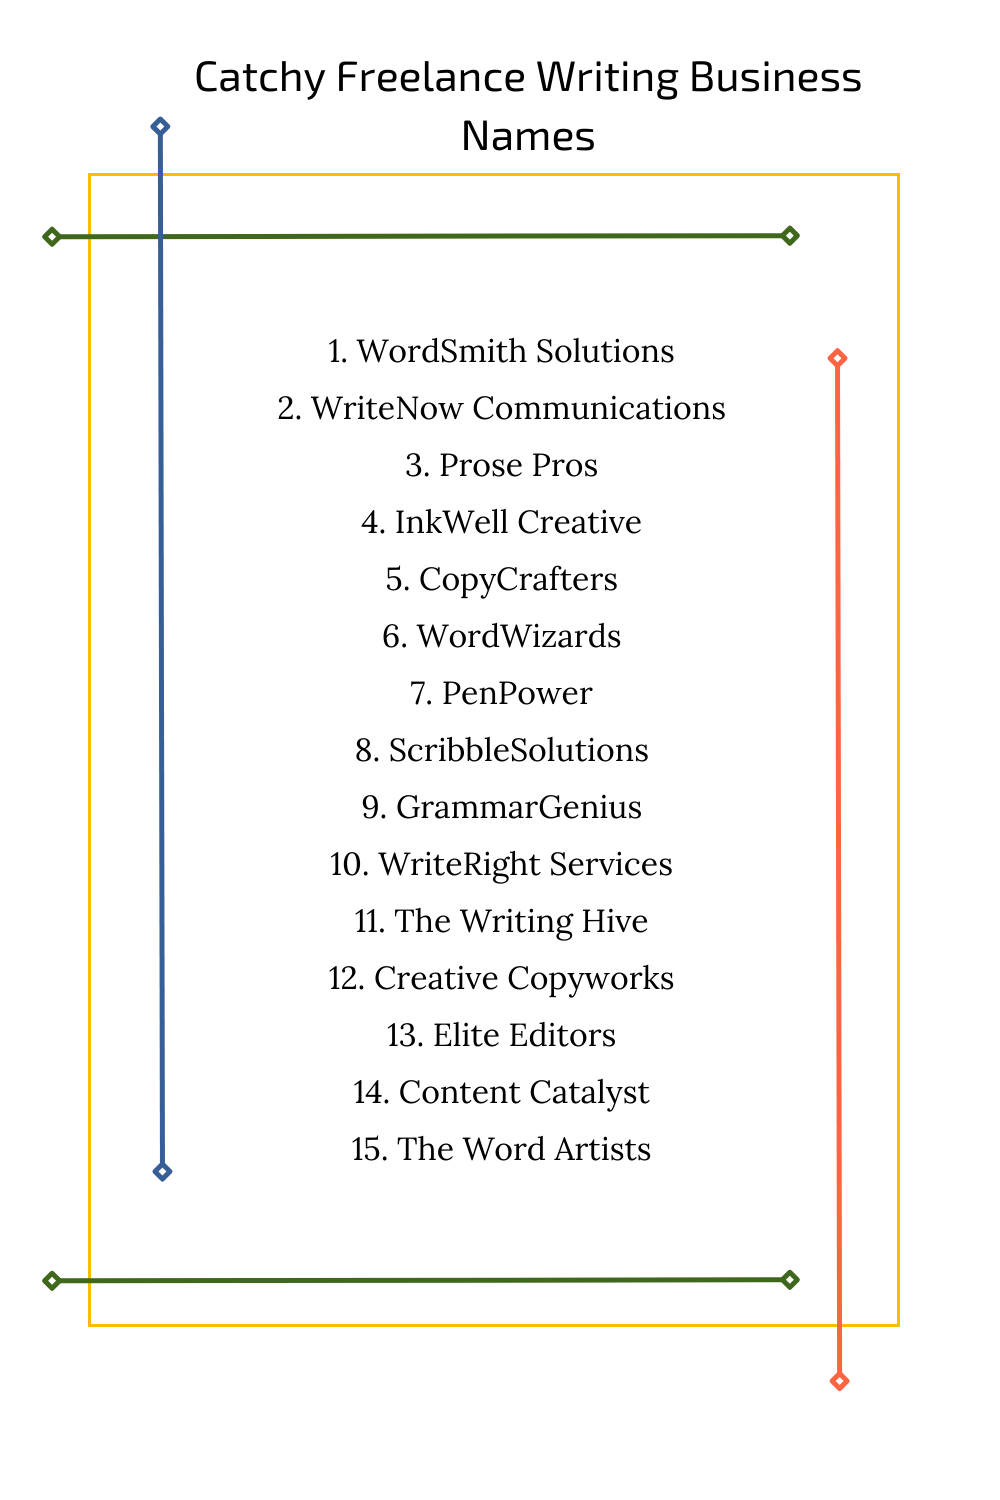 Catchy Freelance Writing Business Names